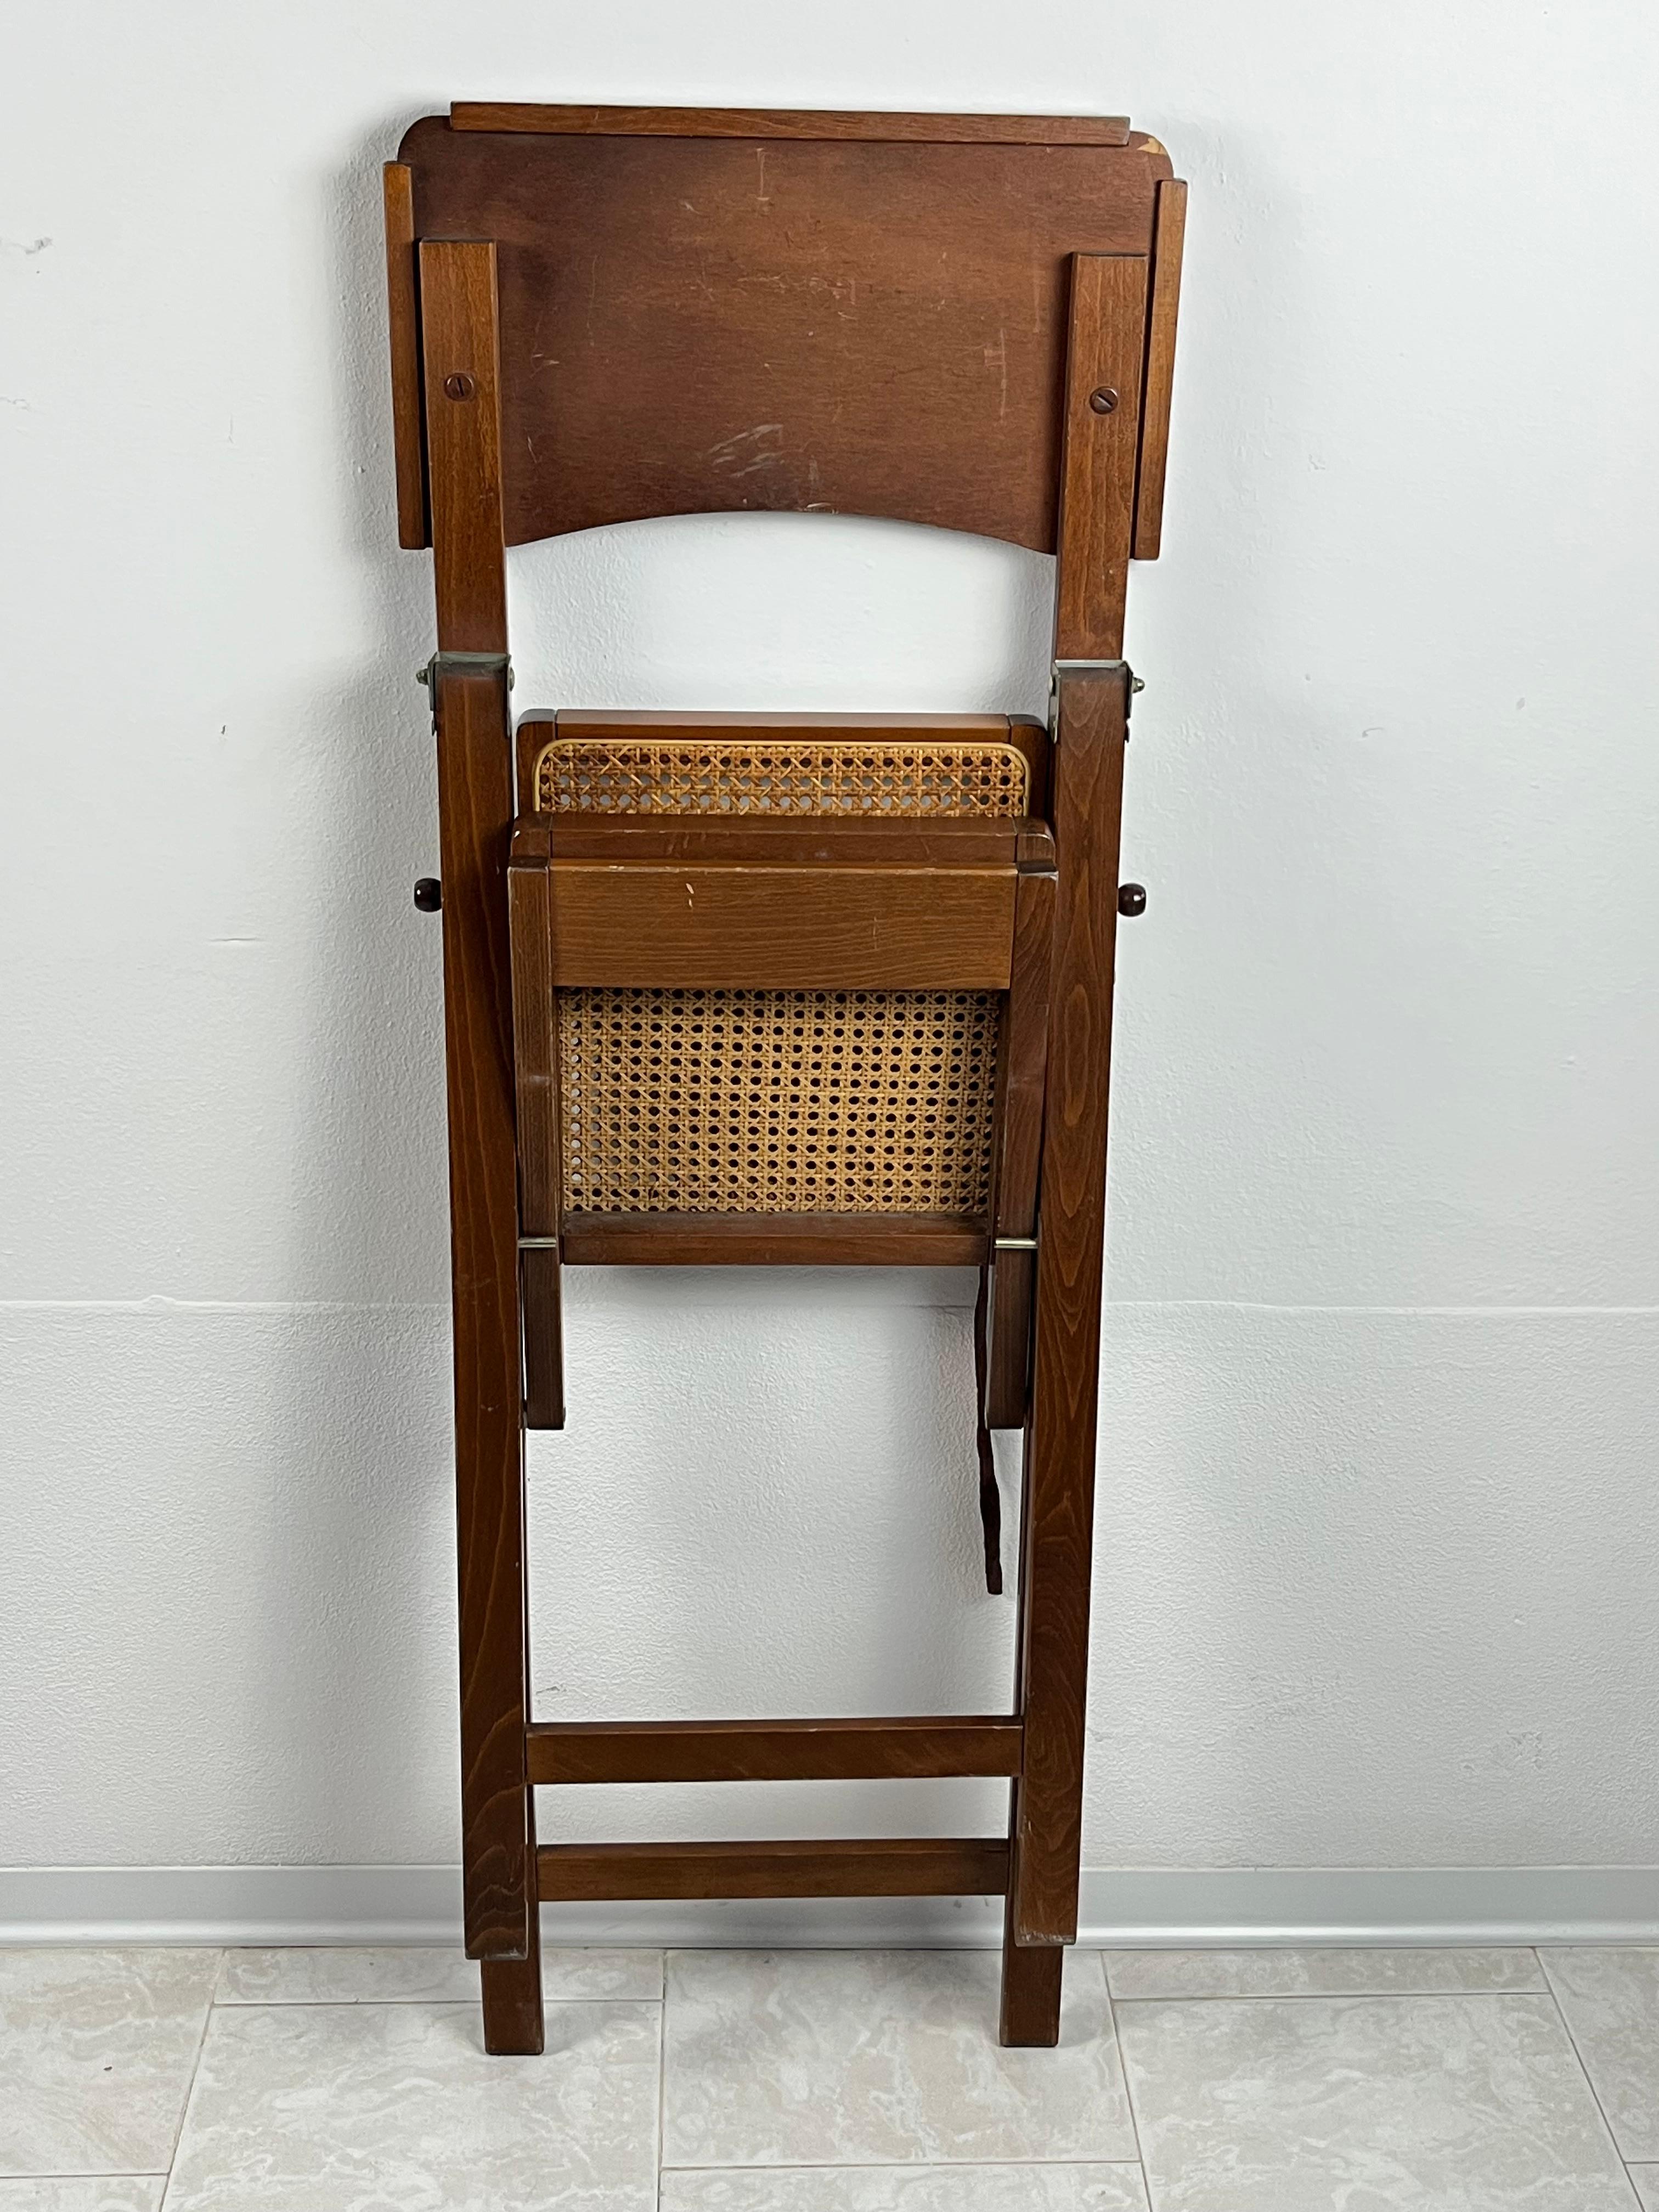 High chair for baby food, Italy, 1960s
Bought by my grandparents, it was used by my father when he was a child. It is in excellent condition. Beech wood and fennel. It has a leather safety belt with a metal buckle. It is foldable, as can be seen